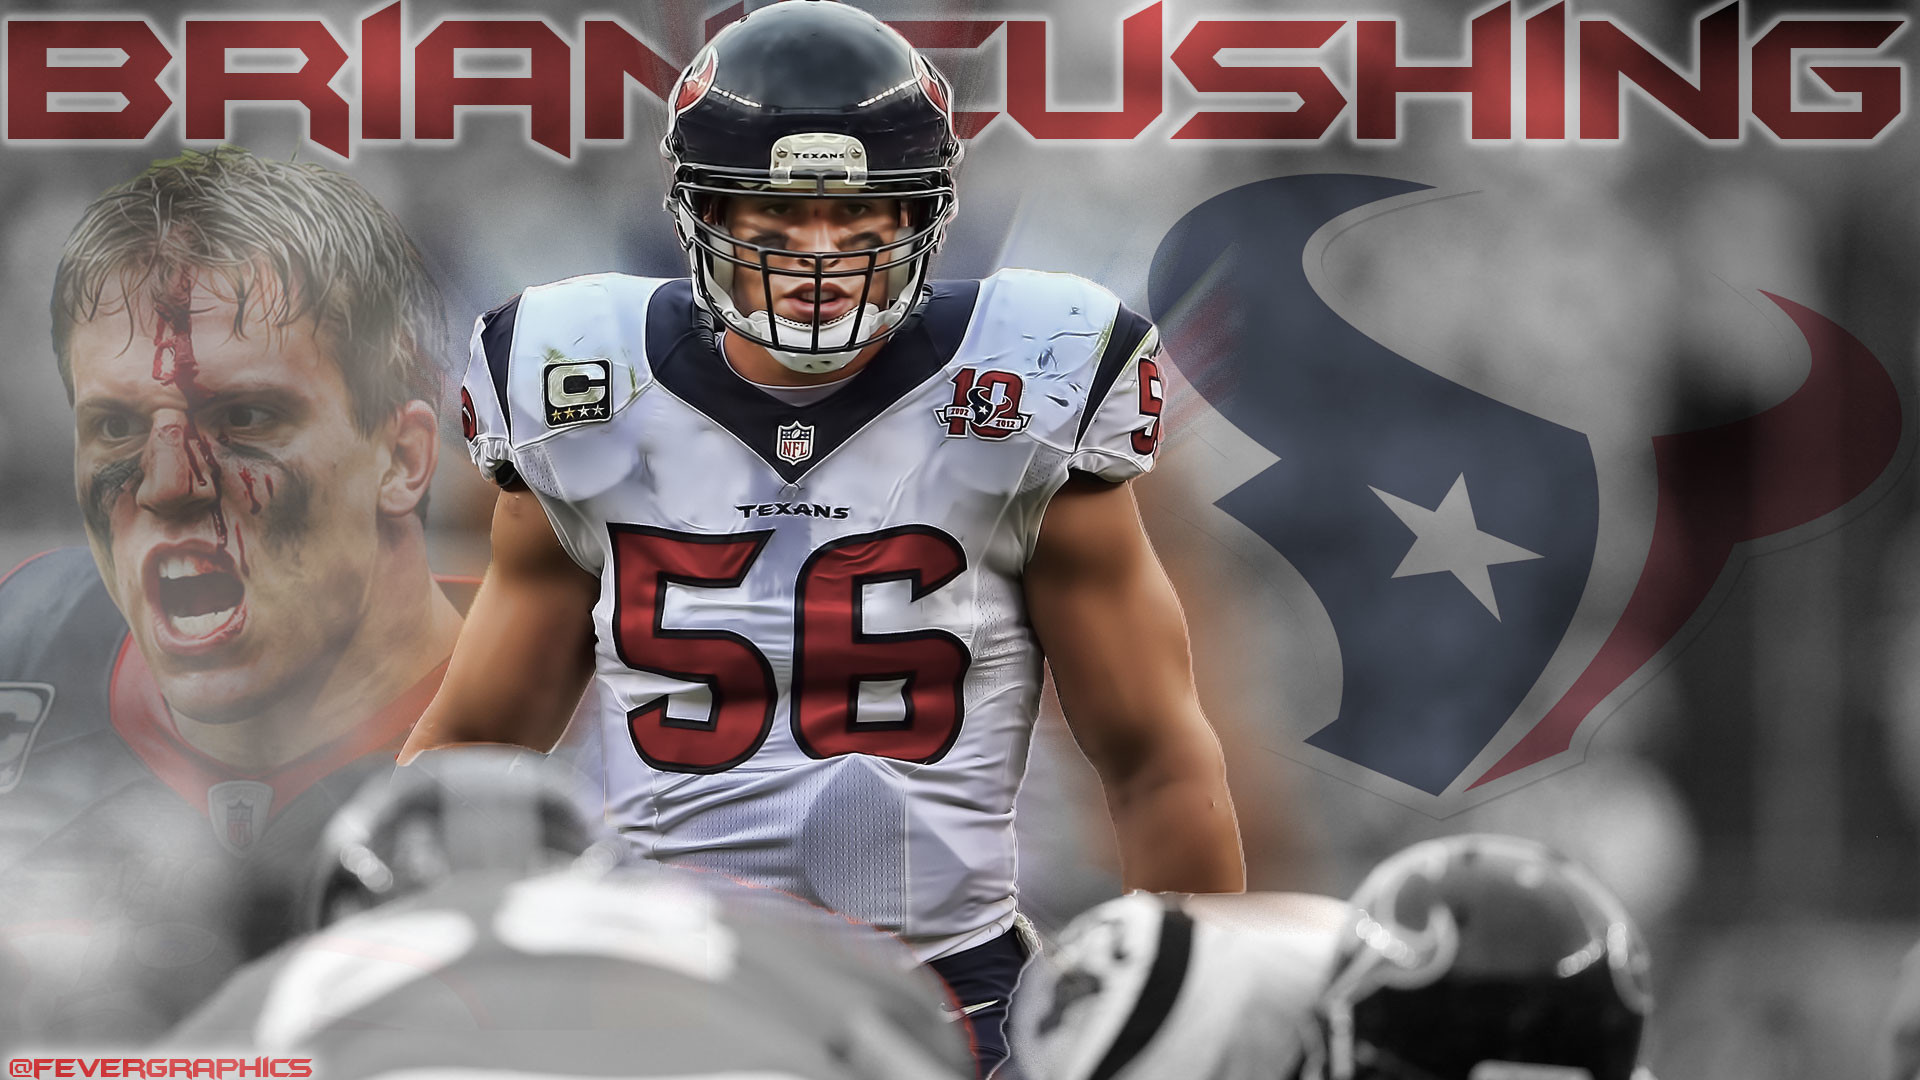 1920x1080 Texans Sub, I made you a Brian Cushing wallpaper, I worked really hard on  it and I hope you guys like it!